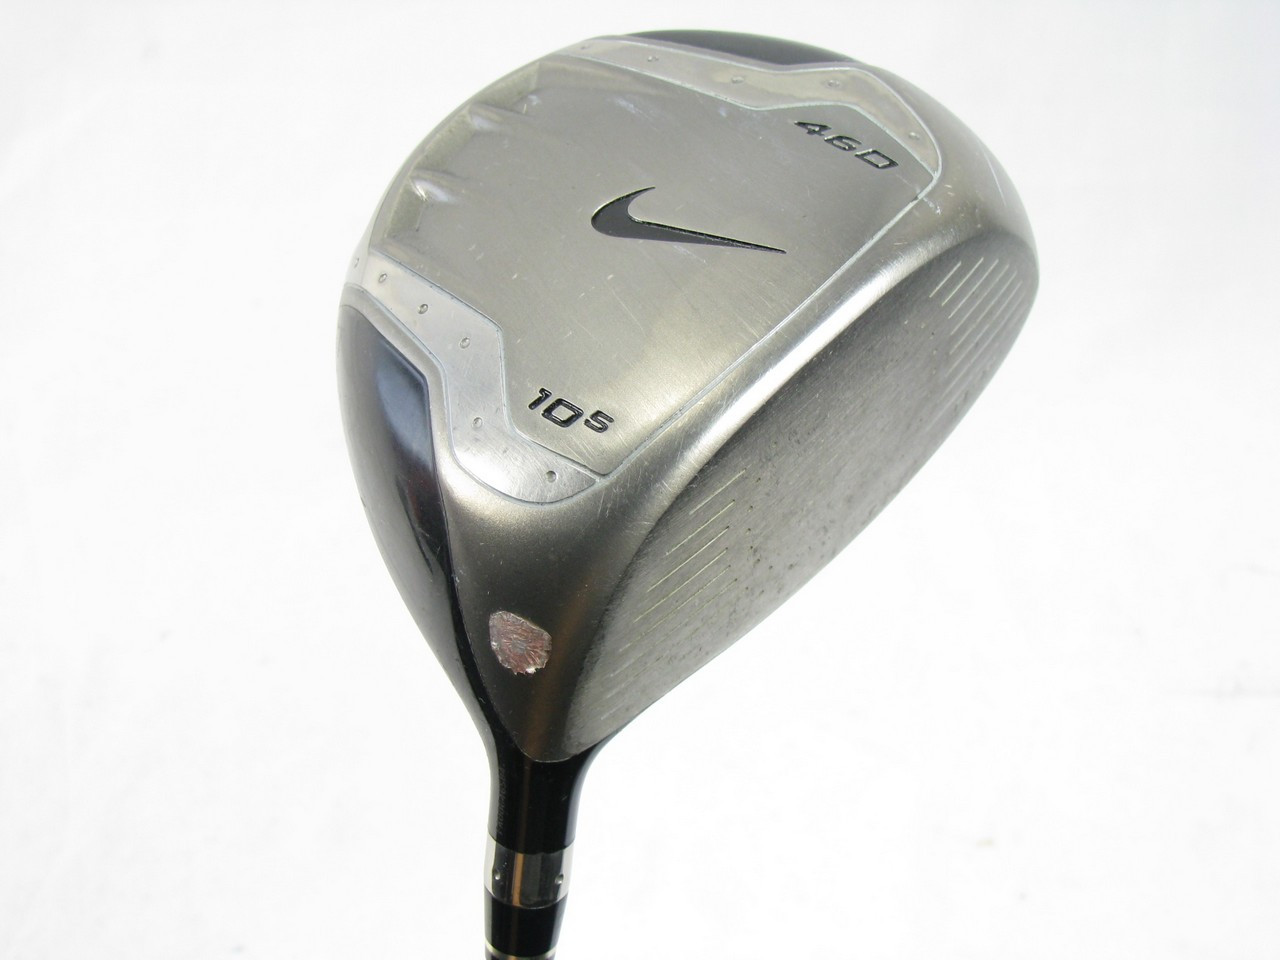 Nike Ignite 460 Driver 10.5 degree w/ Graphite Stiff Flex (Out of Stock) -  Clubs n Covers Golf